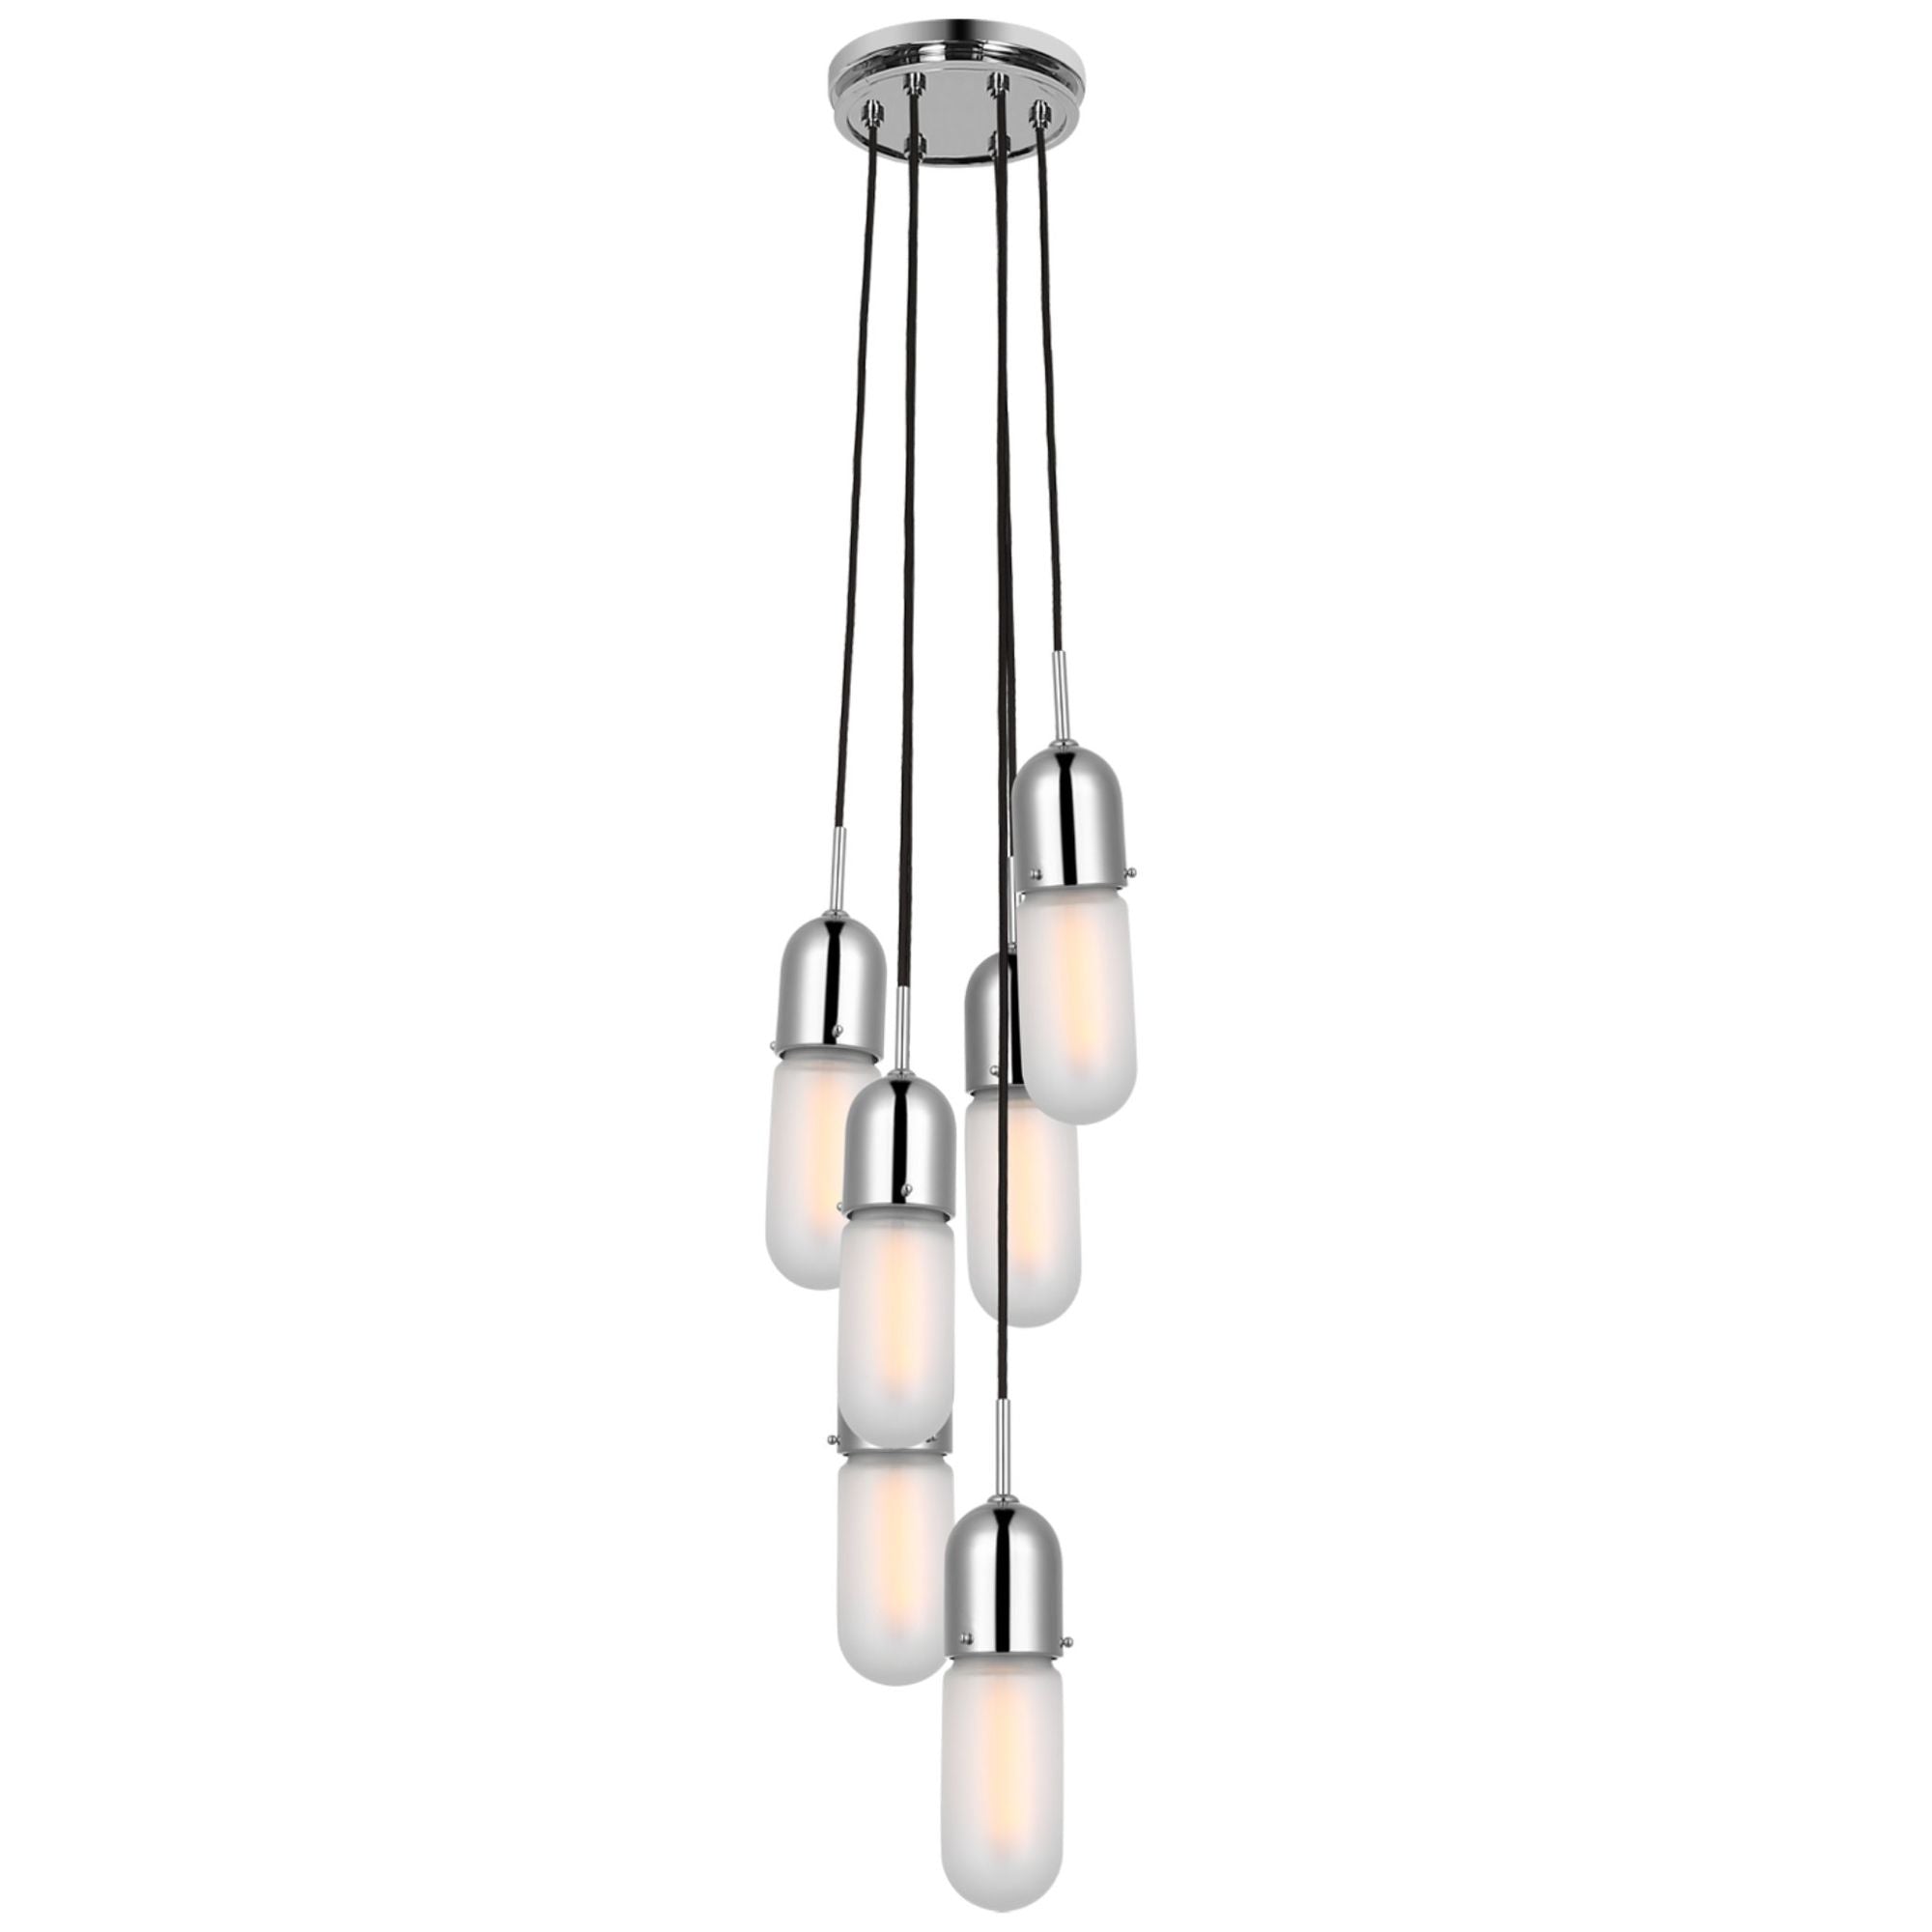 Thomas O'Brien Junio 6-Light Pendant in Polished Nickel with Frosted Glass